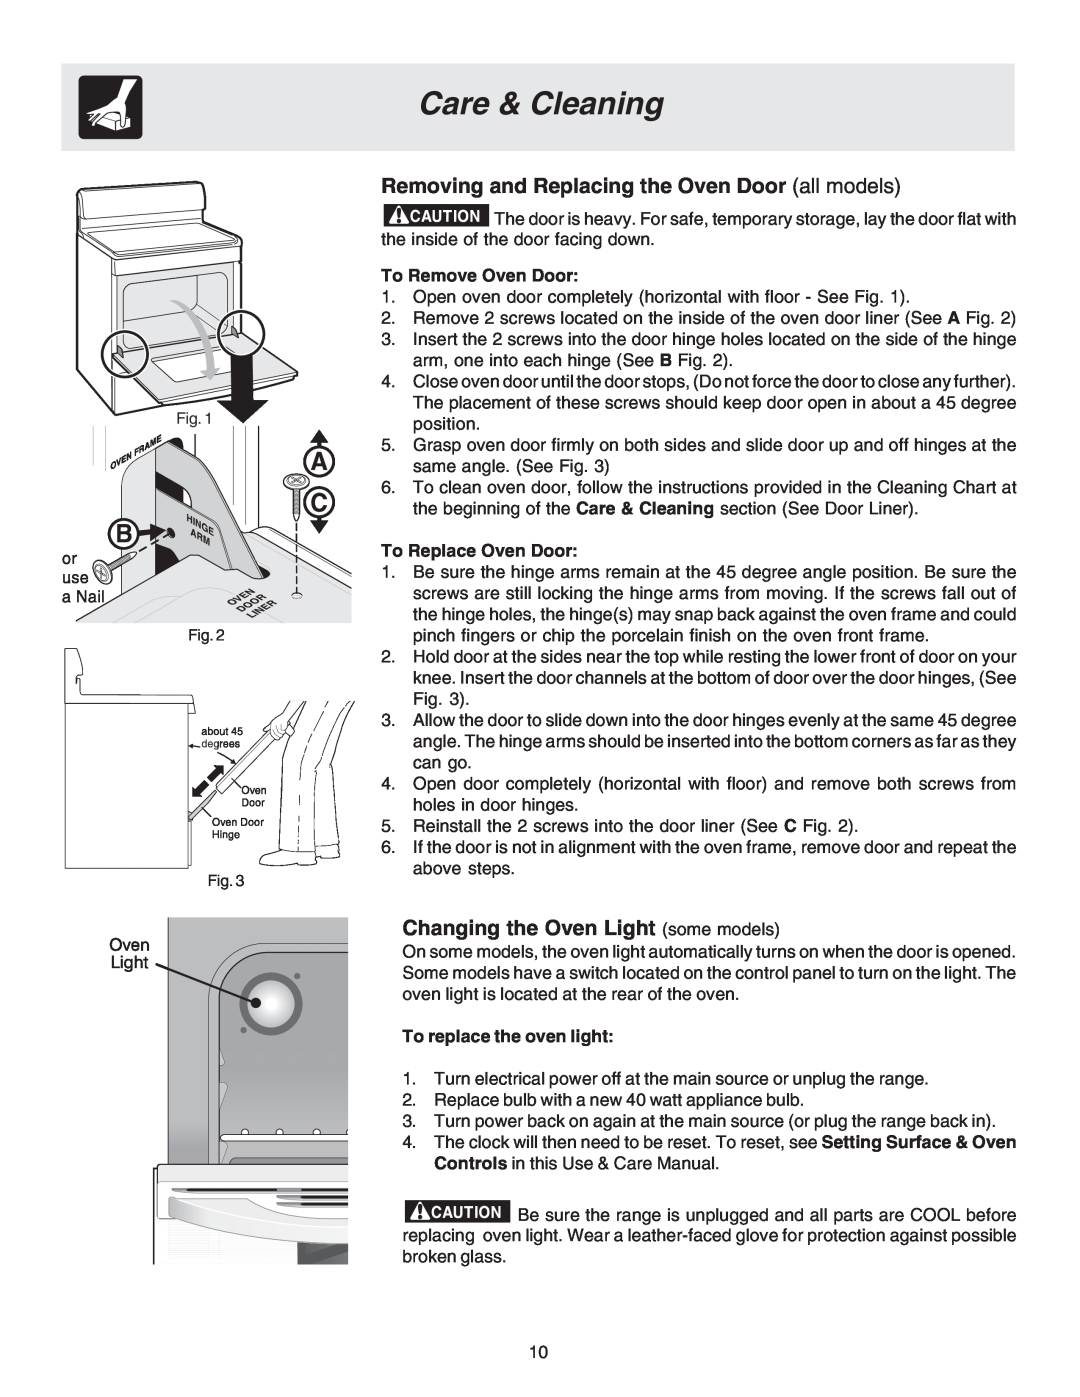 Crosley 316257131 Removing and Replacing the Oven Door all models, Changing the Oven Light some models, Care & Cleaning 